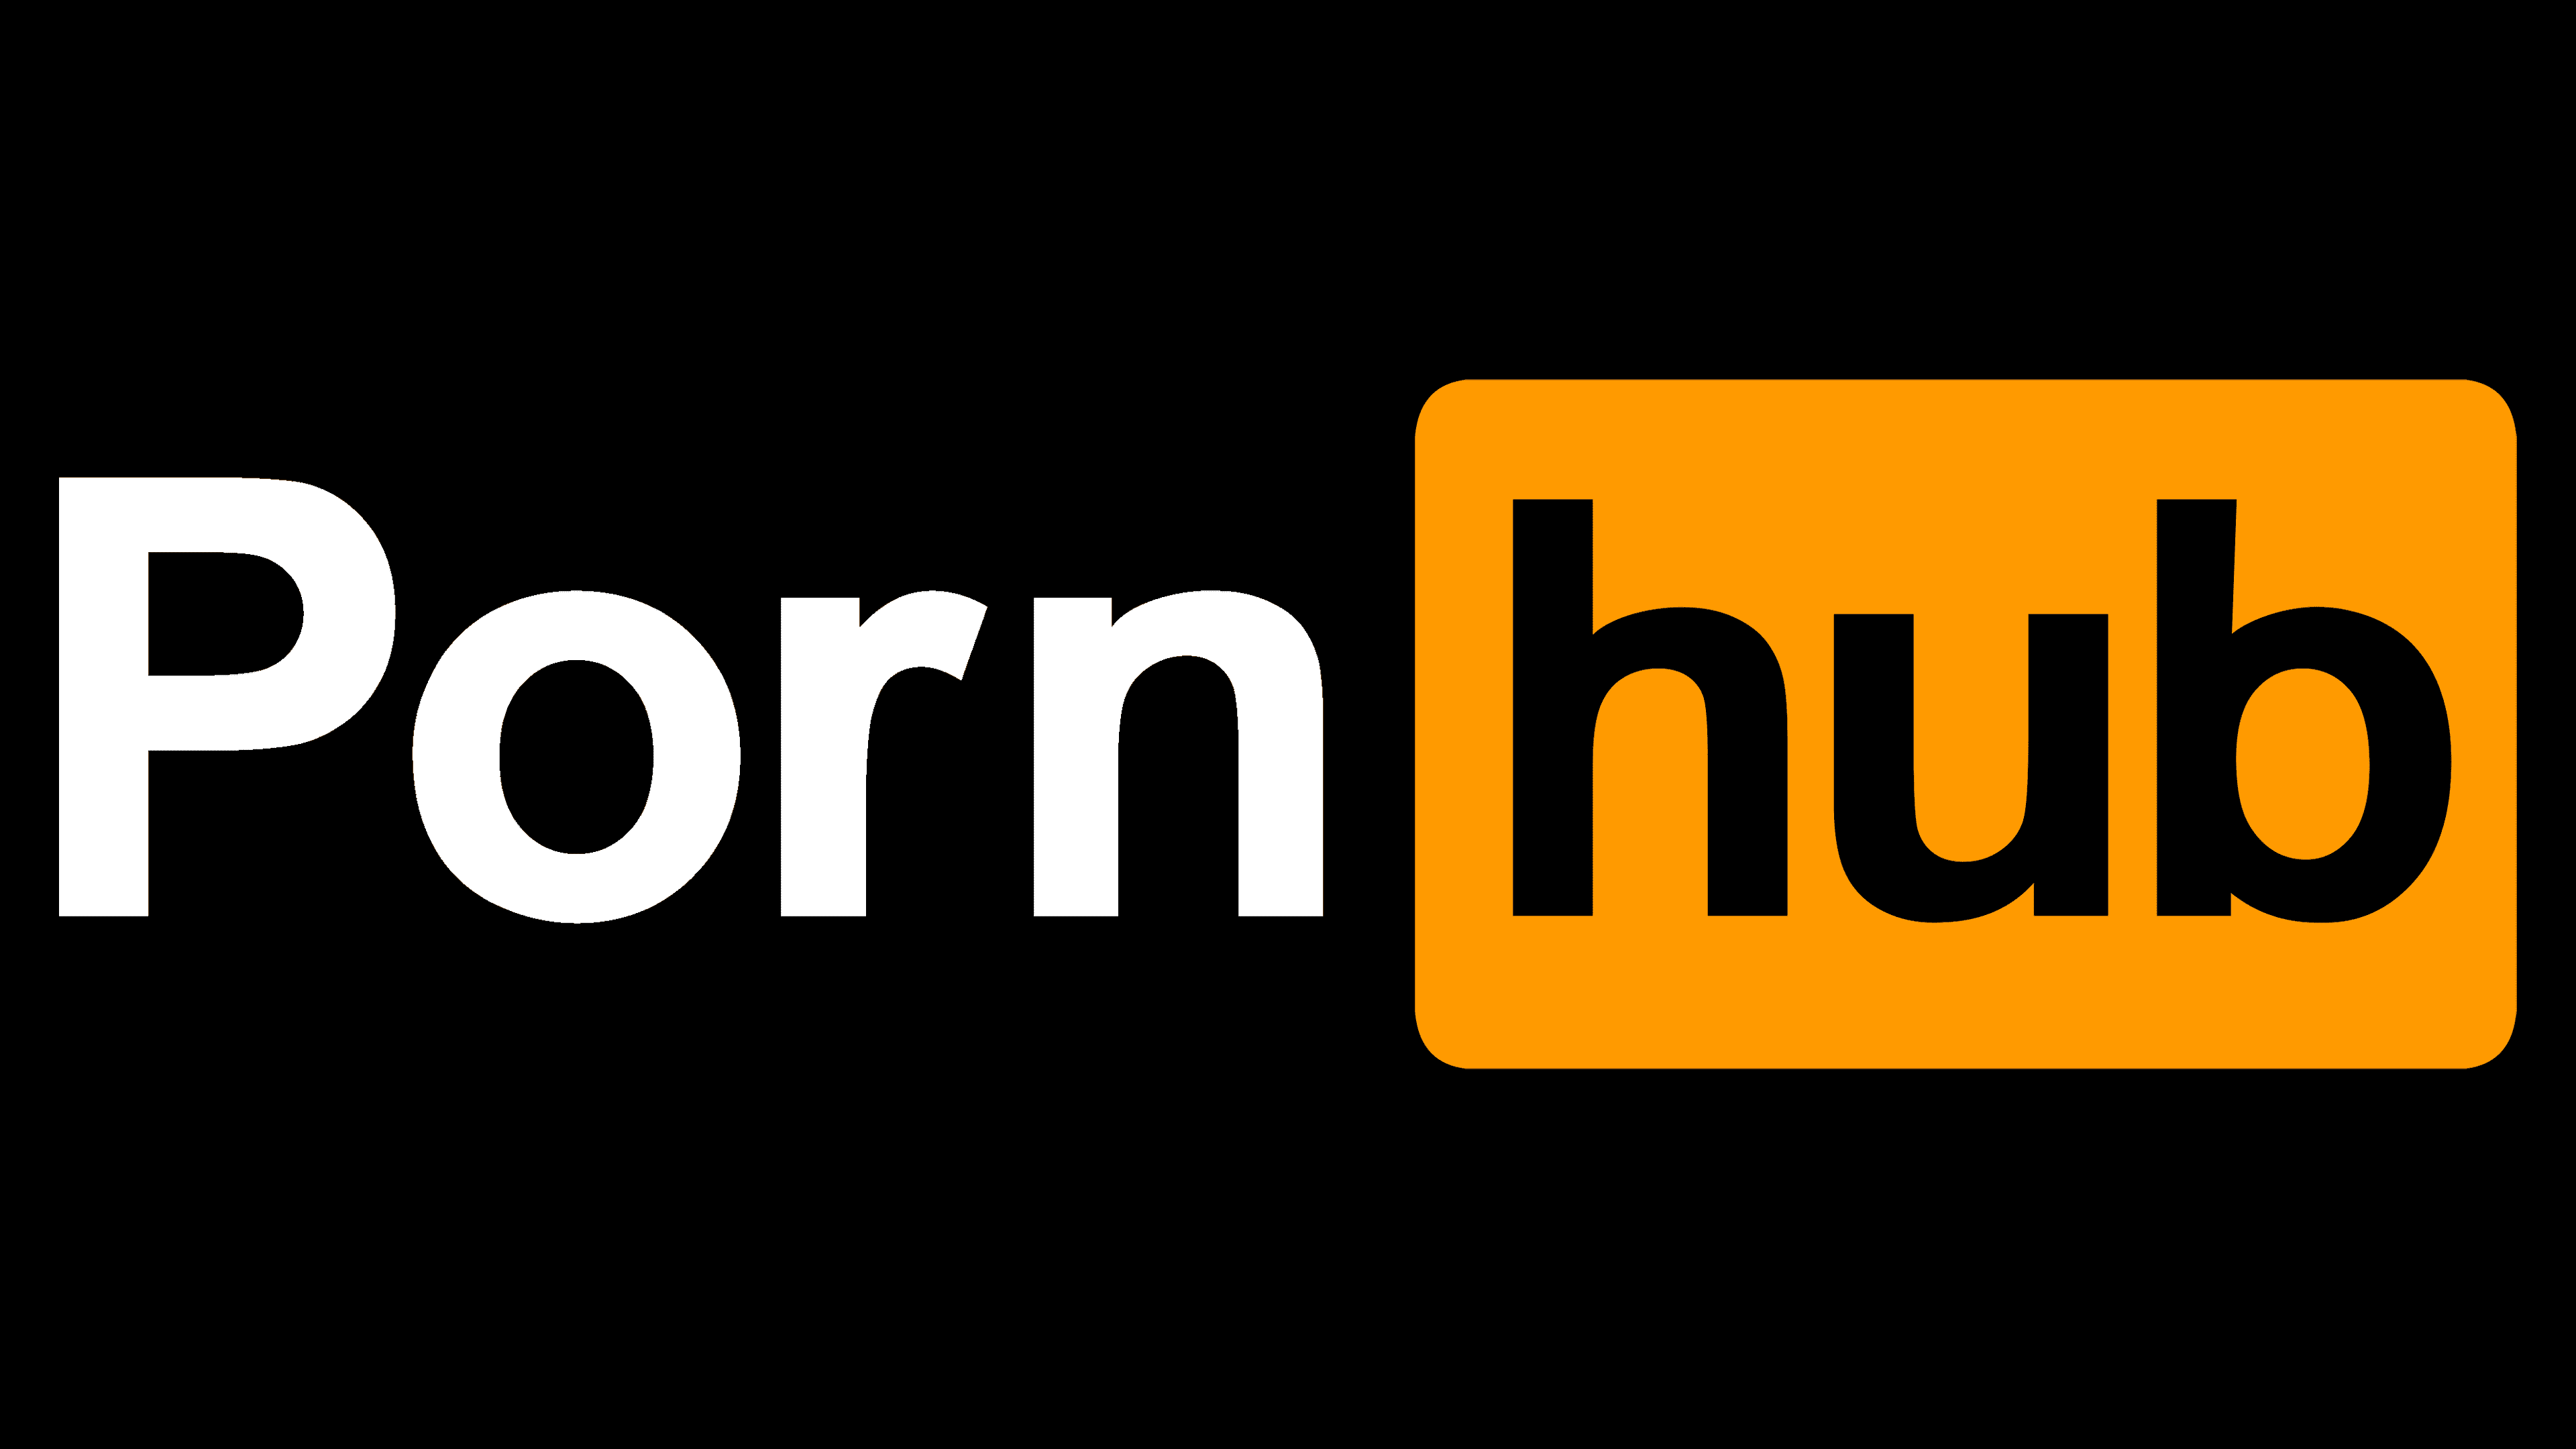 Download From Porn Hub Pornhub Logo, symbol, meaning, history, PNG, brand